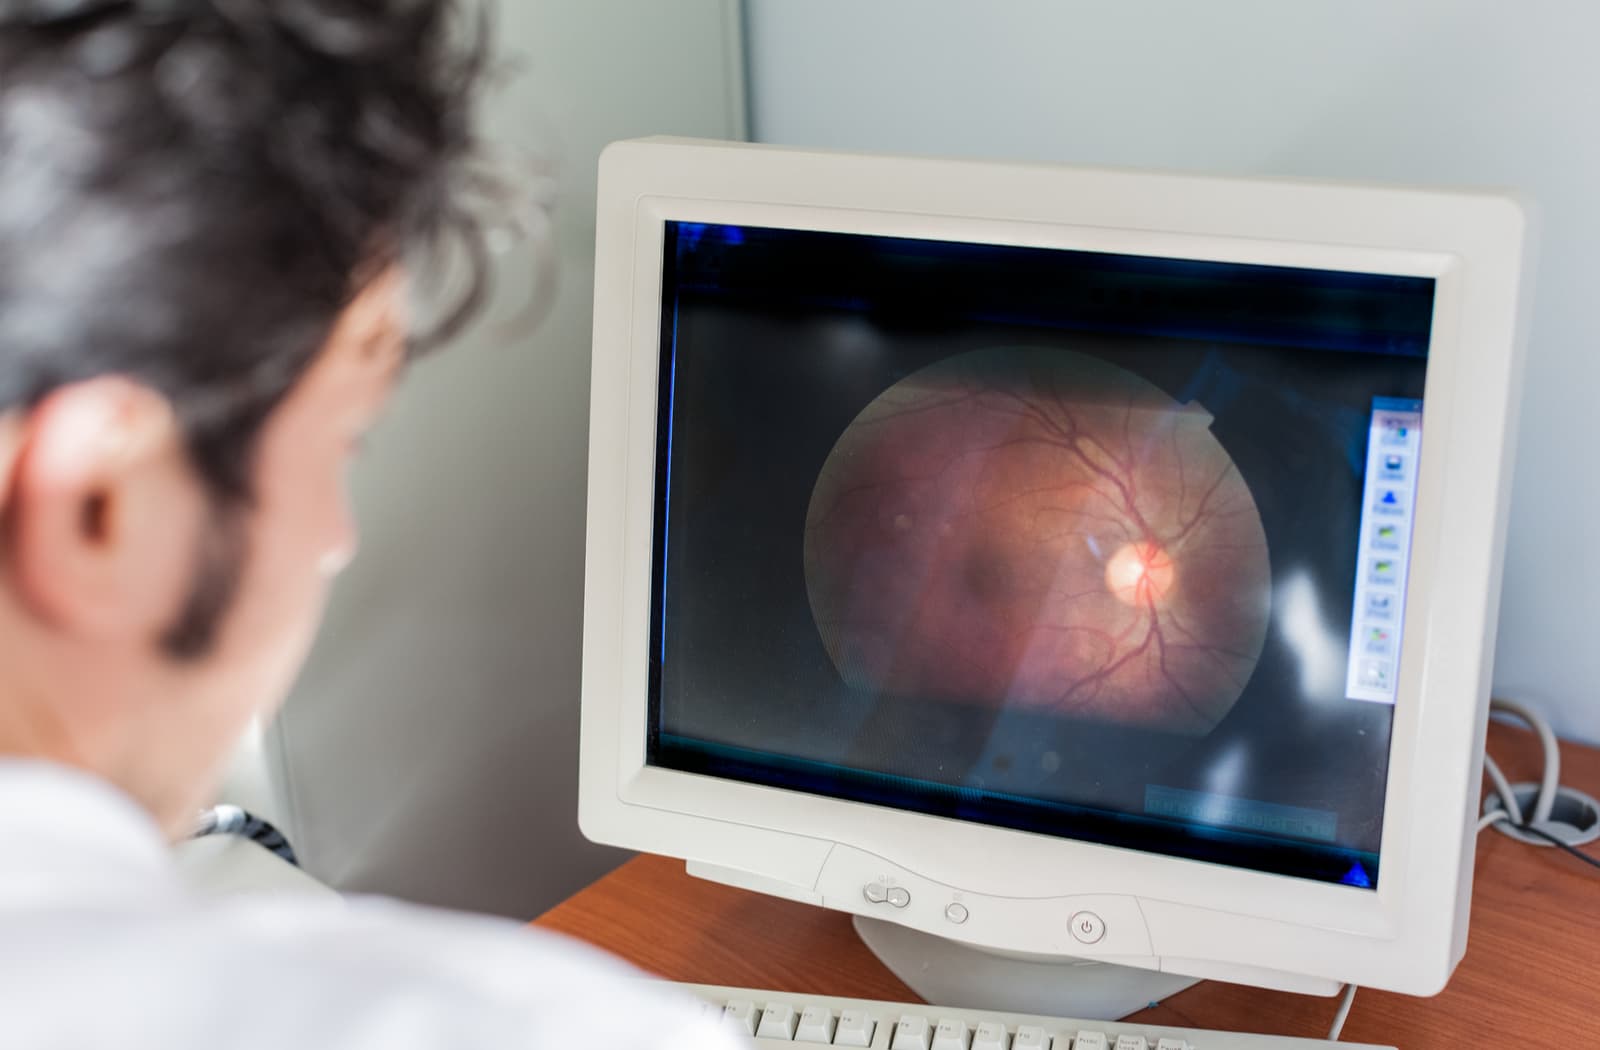 Optometrist looking at retinal imaging on a computer screen